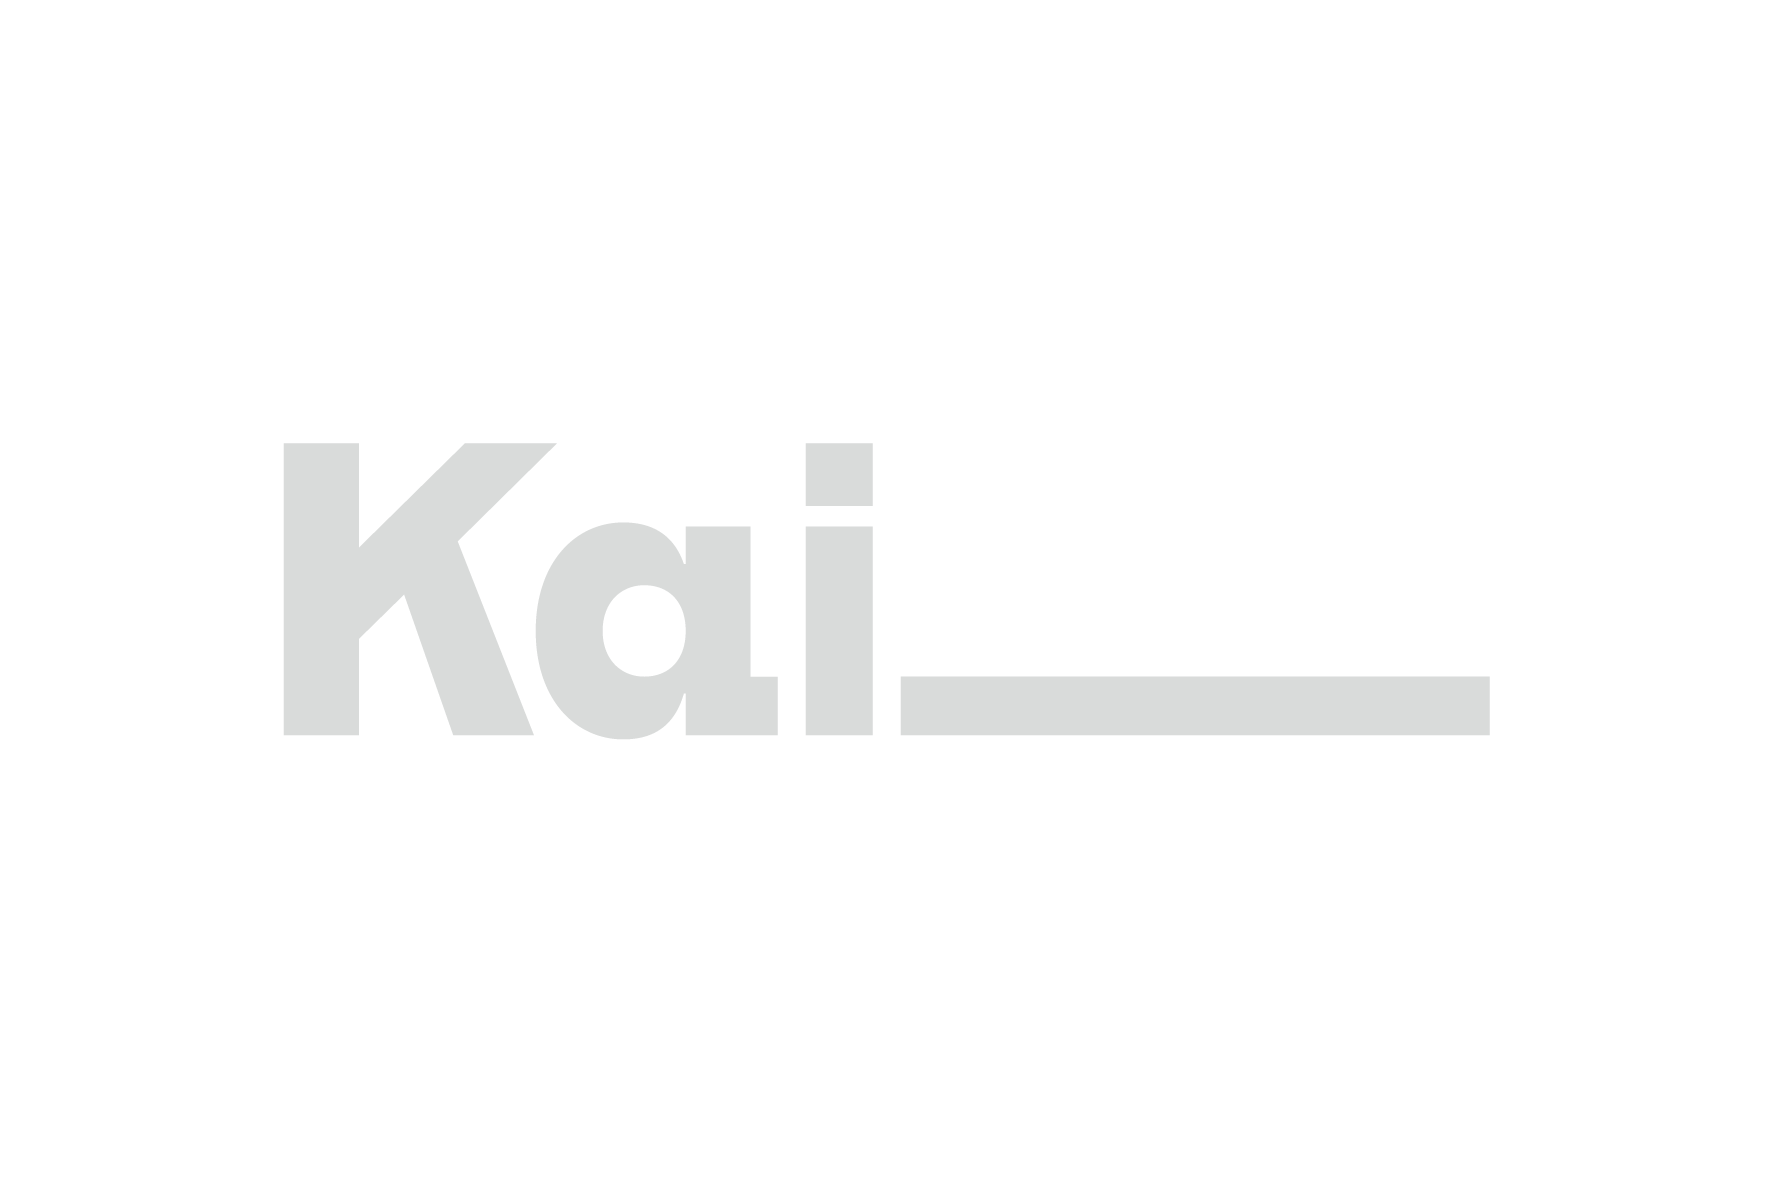 https://www.trtr.ee/wp-content/uploads/2017/03/kai-logo_hall_300x200-01.png